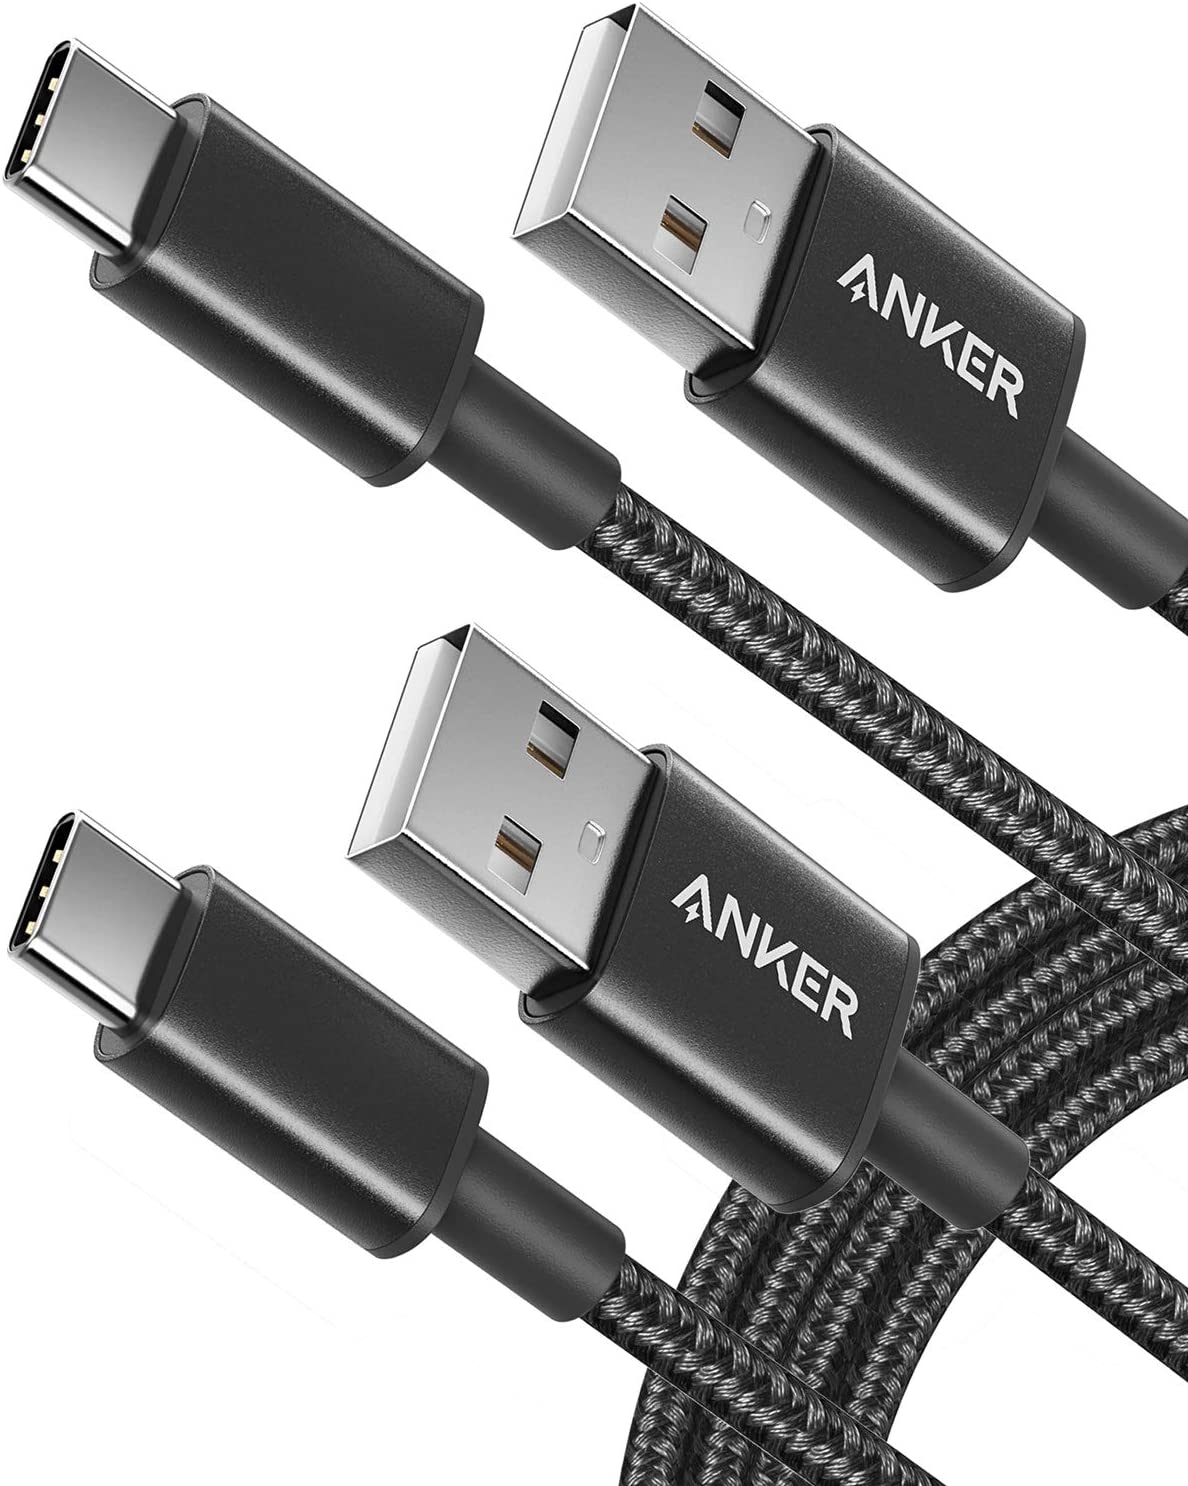 Anker USB C Cable 3ft USB A to USB C Charger Cable